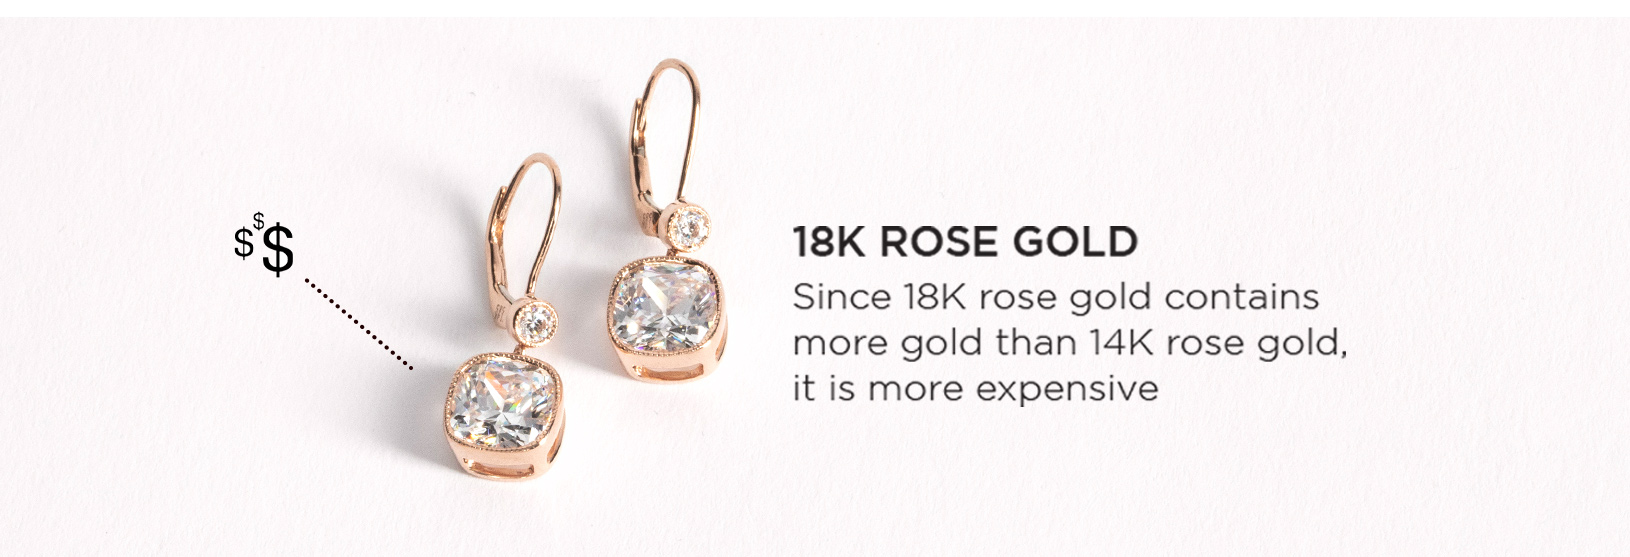 18K rose gold is more expensive than 14K rose gold